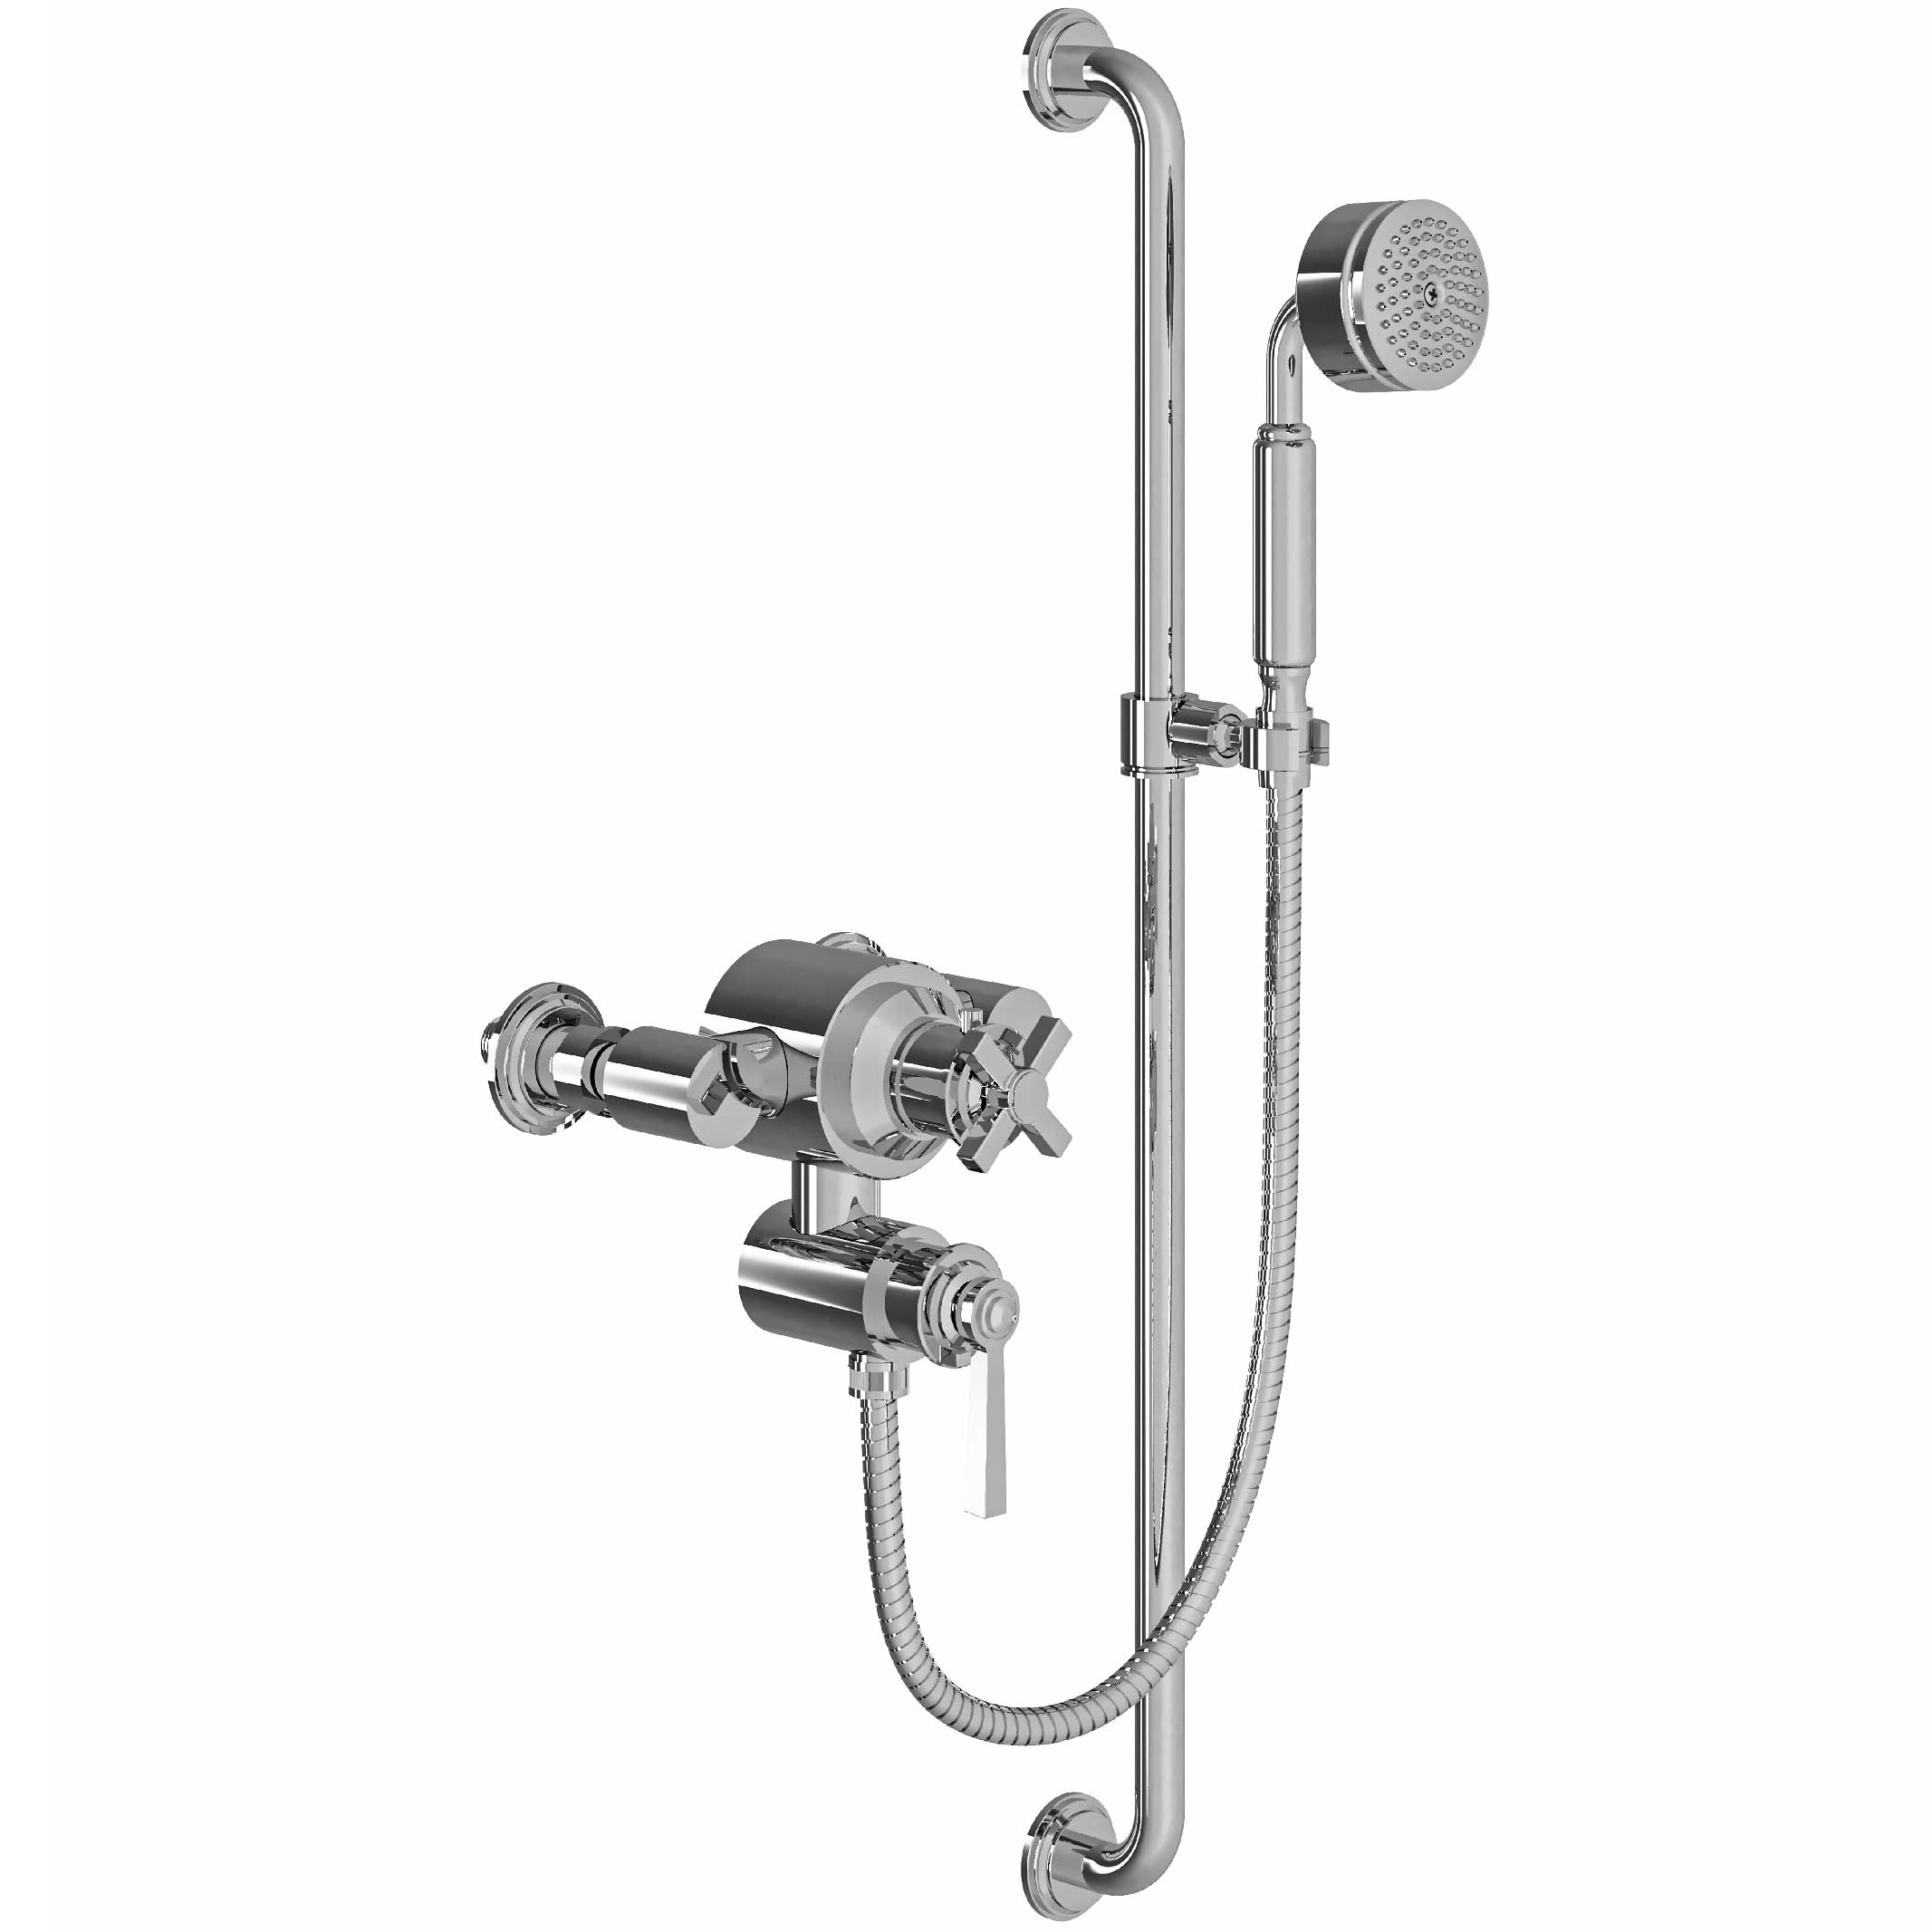 M61-2202T Mitigeur thermo. douche, coulidouche